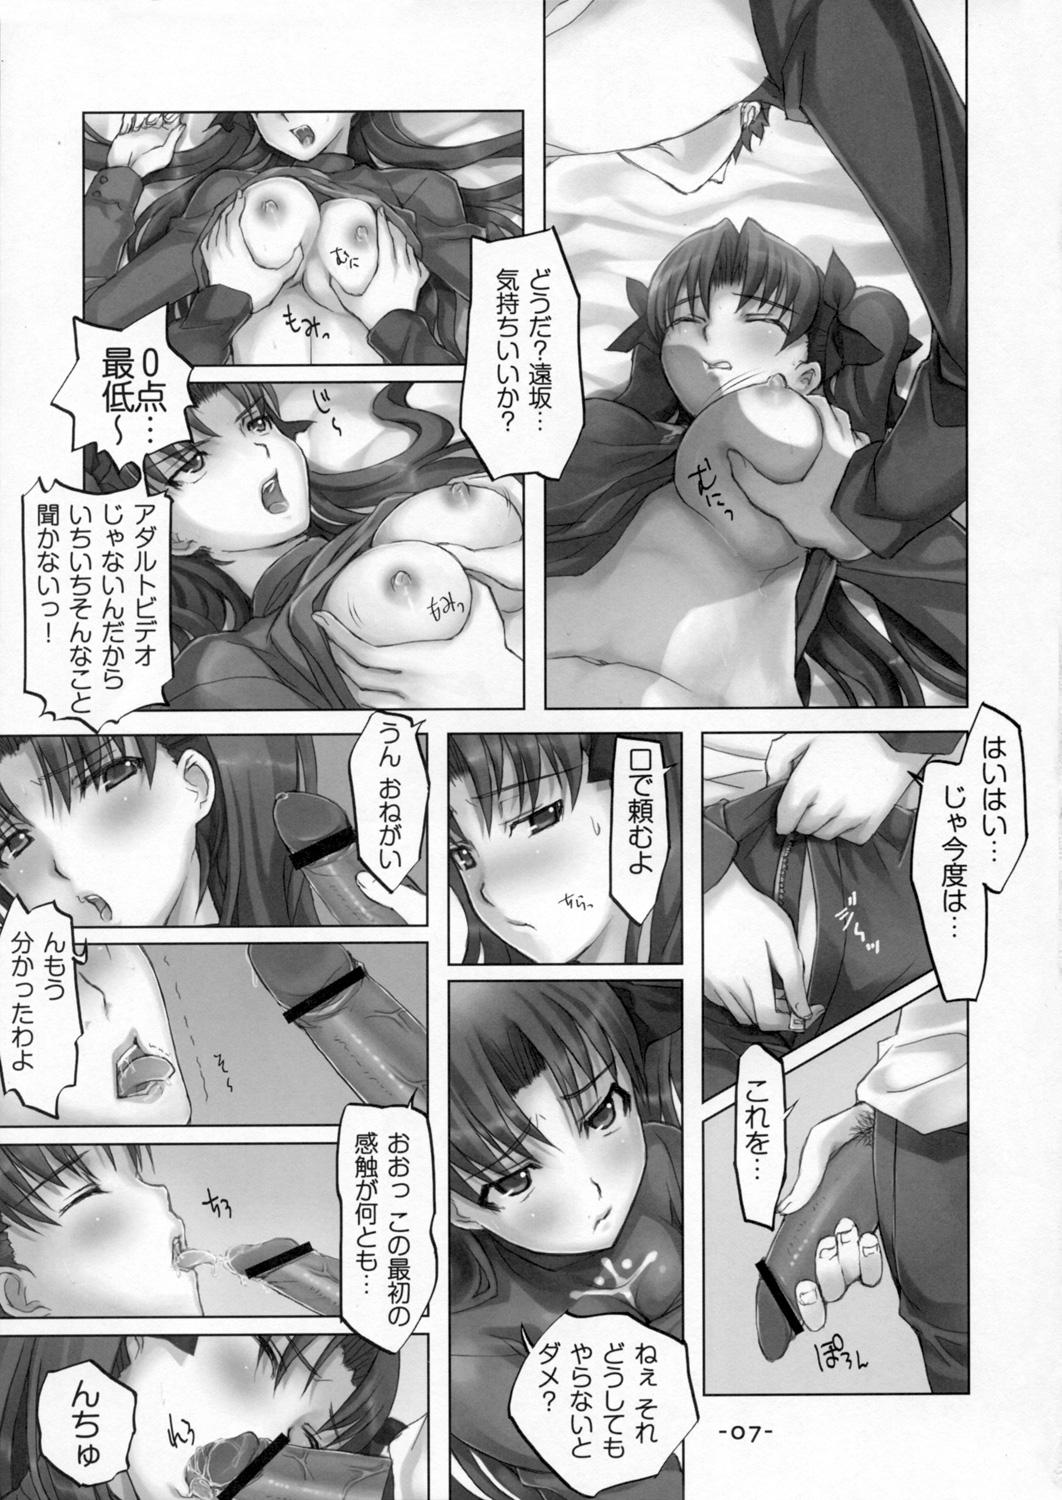 Pickup DAILY LIFE - Fate stay night Fate hollow ataraxia Safadinha - Page 6